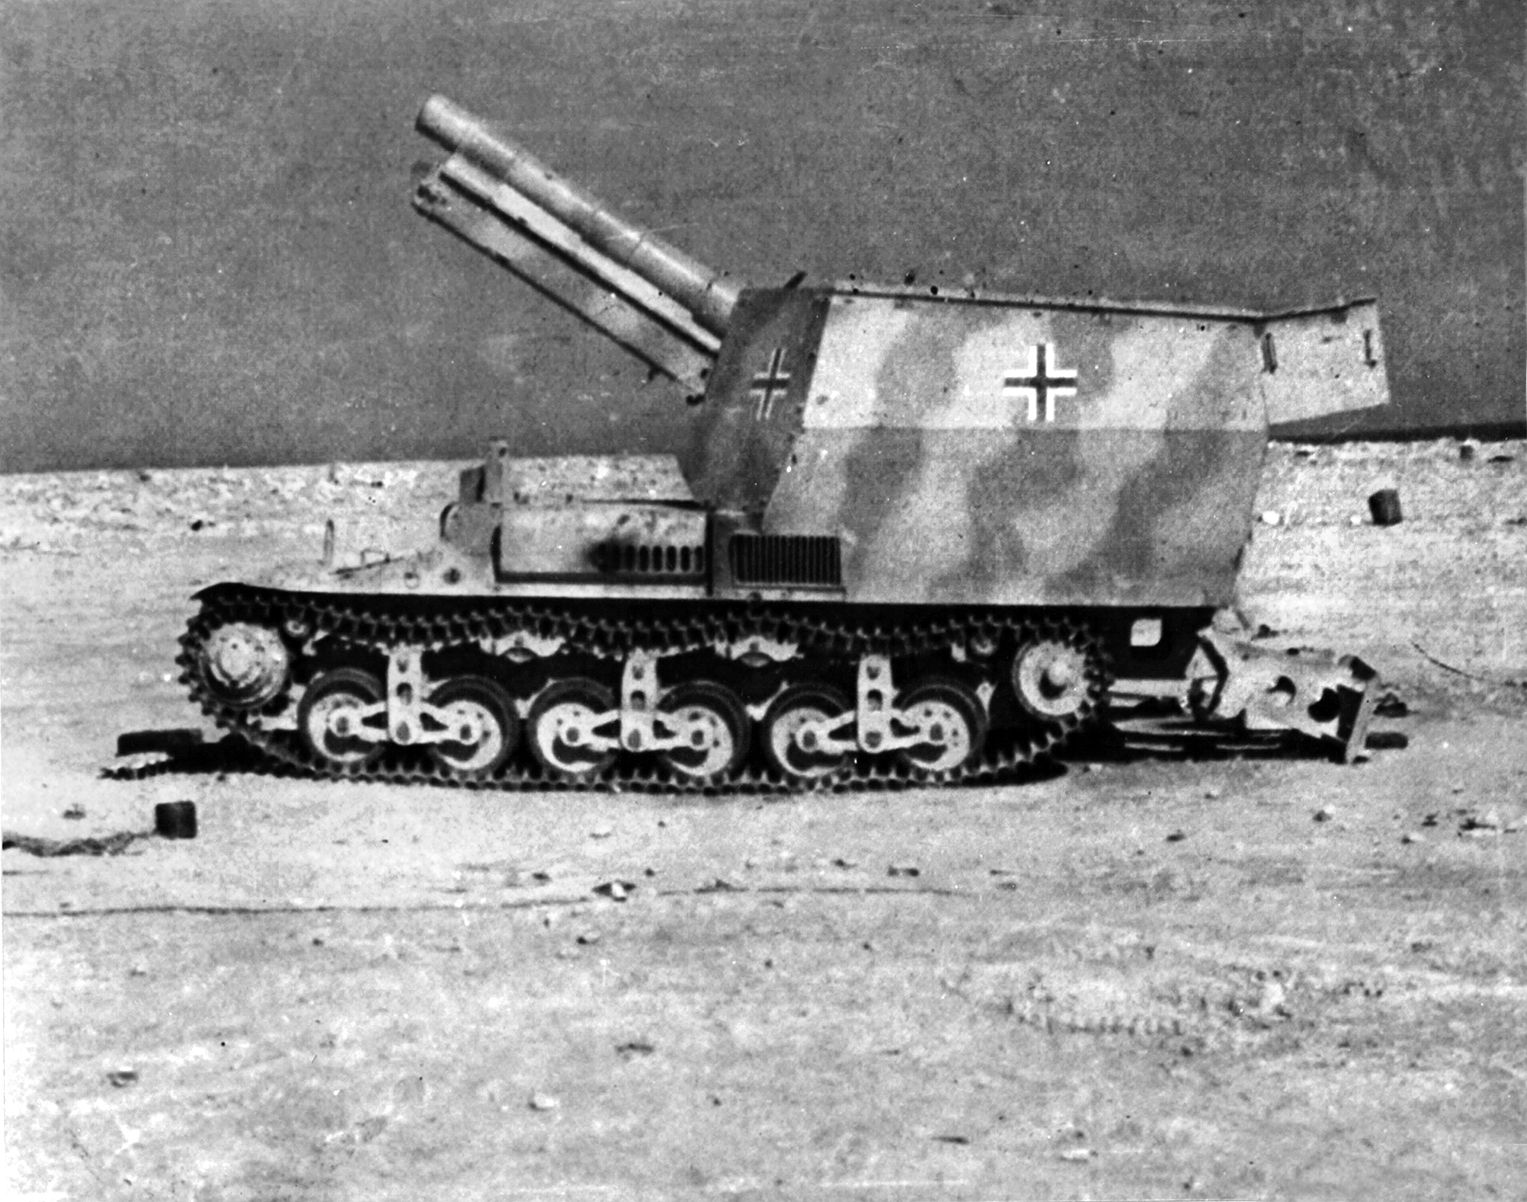 A Becker-designed 10.5cm leFH-18/40 auf Geschützwagen Lorraine Schlepper(f) self-propelled artillery gun. “Schlepper" means “tractor," and the (f) indicates the chassis was French. These armored vehicles were fast enough to keep pace with panzer units.